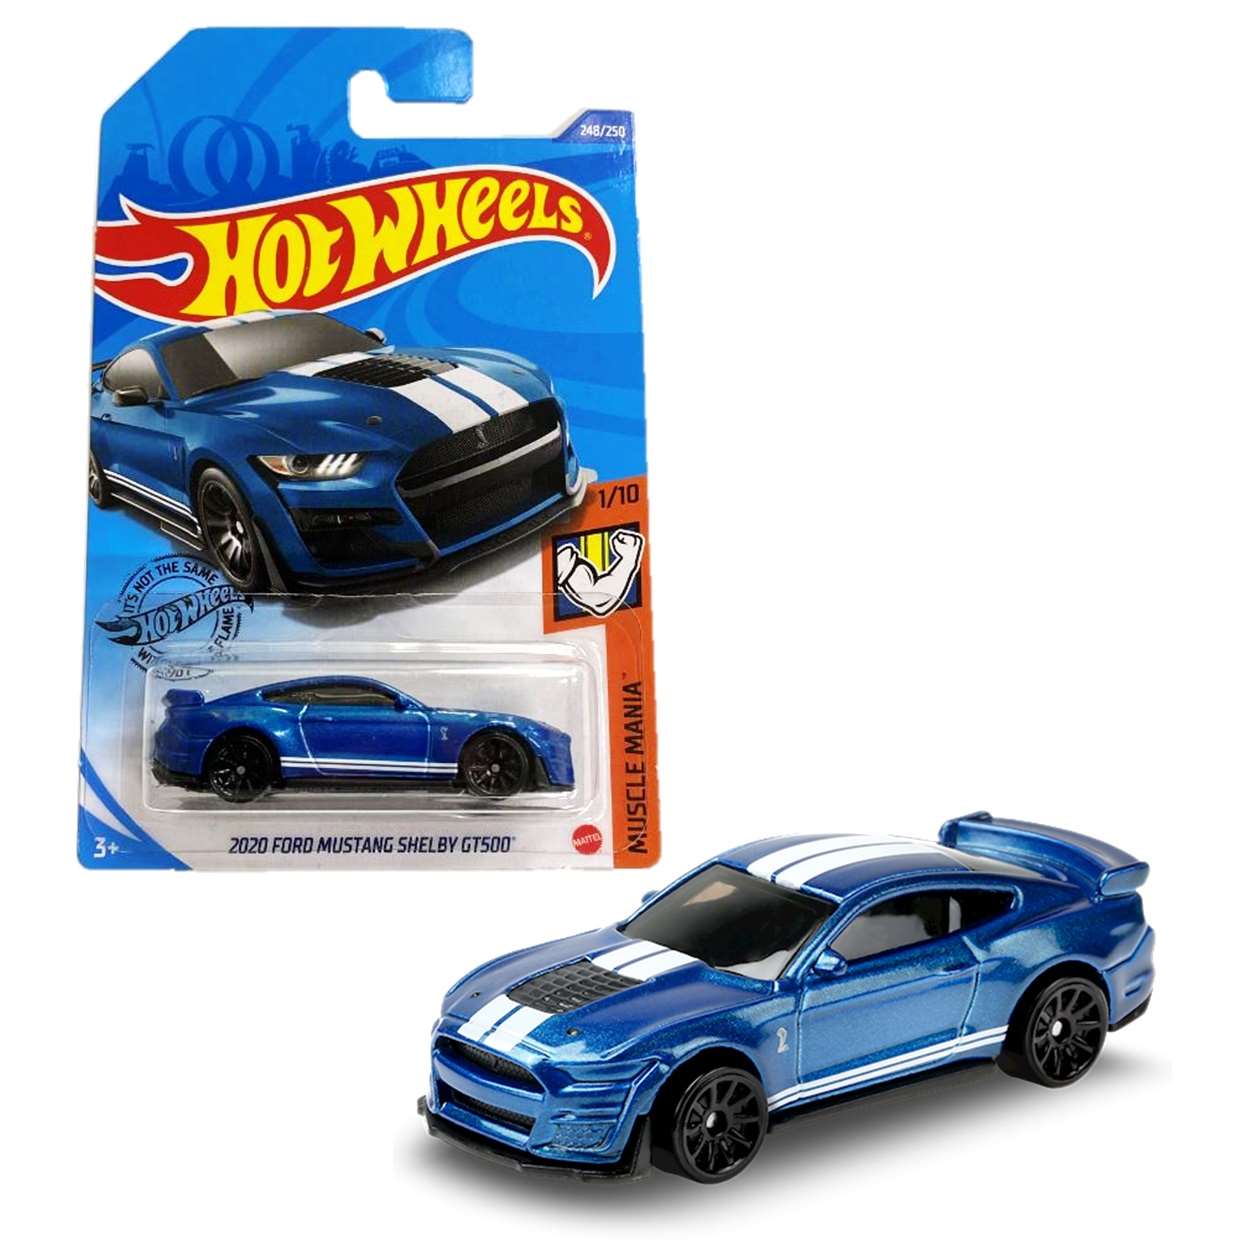 2020 Ford Mustang Shelby Gt500 1/10 Hot Wheels Muscle Mania